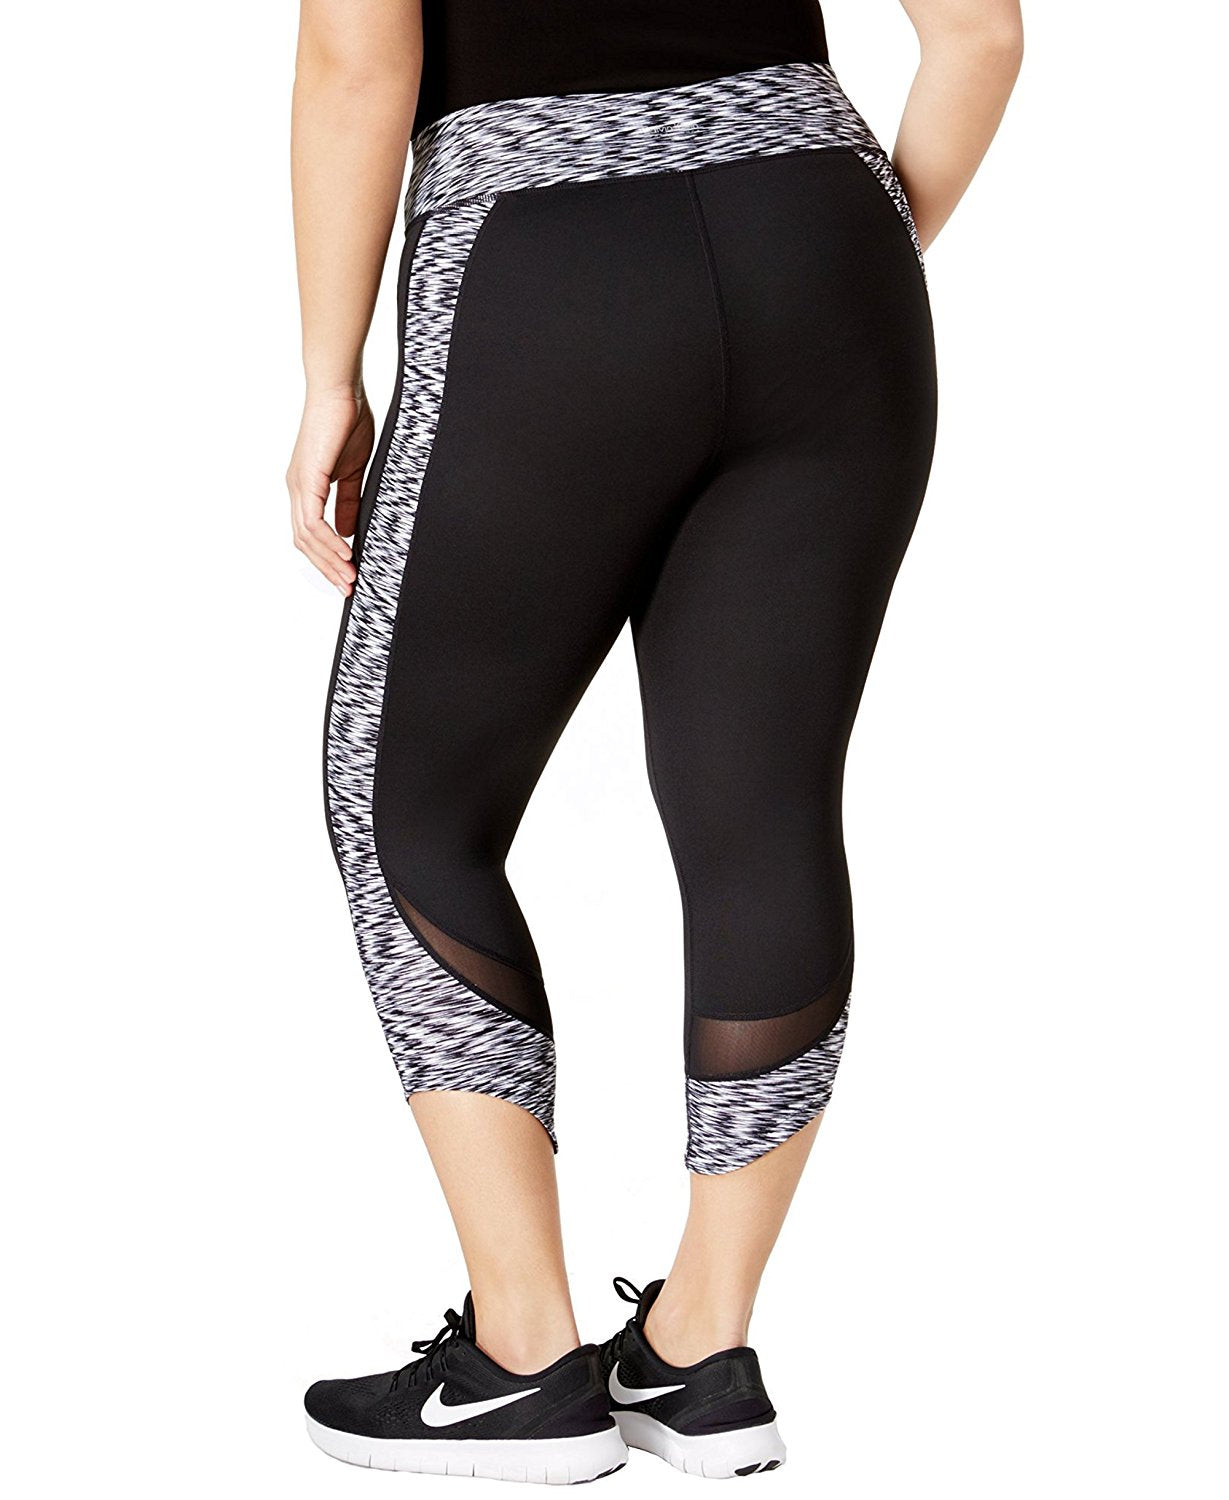 Calvin Klein Womens Plus Size Space Dyed Compression Leggings